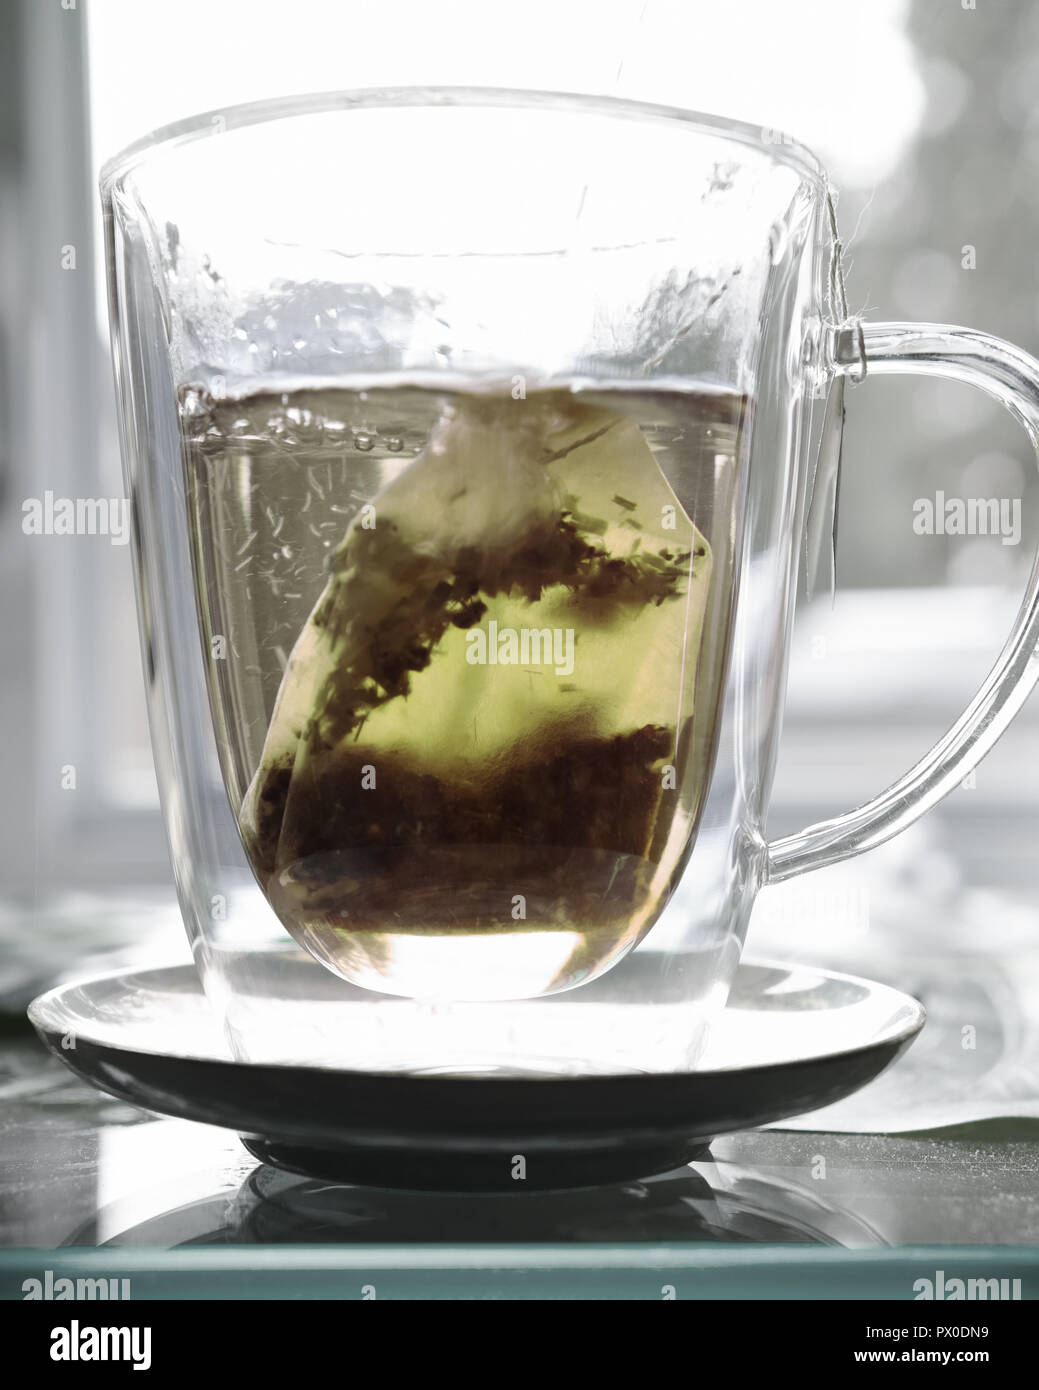 A clear glass cup with pale tea in it and the tea bag. Stock Photo